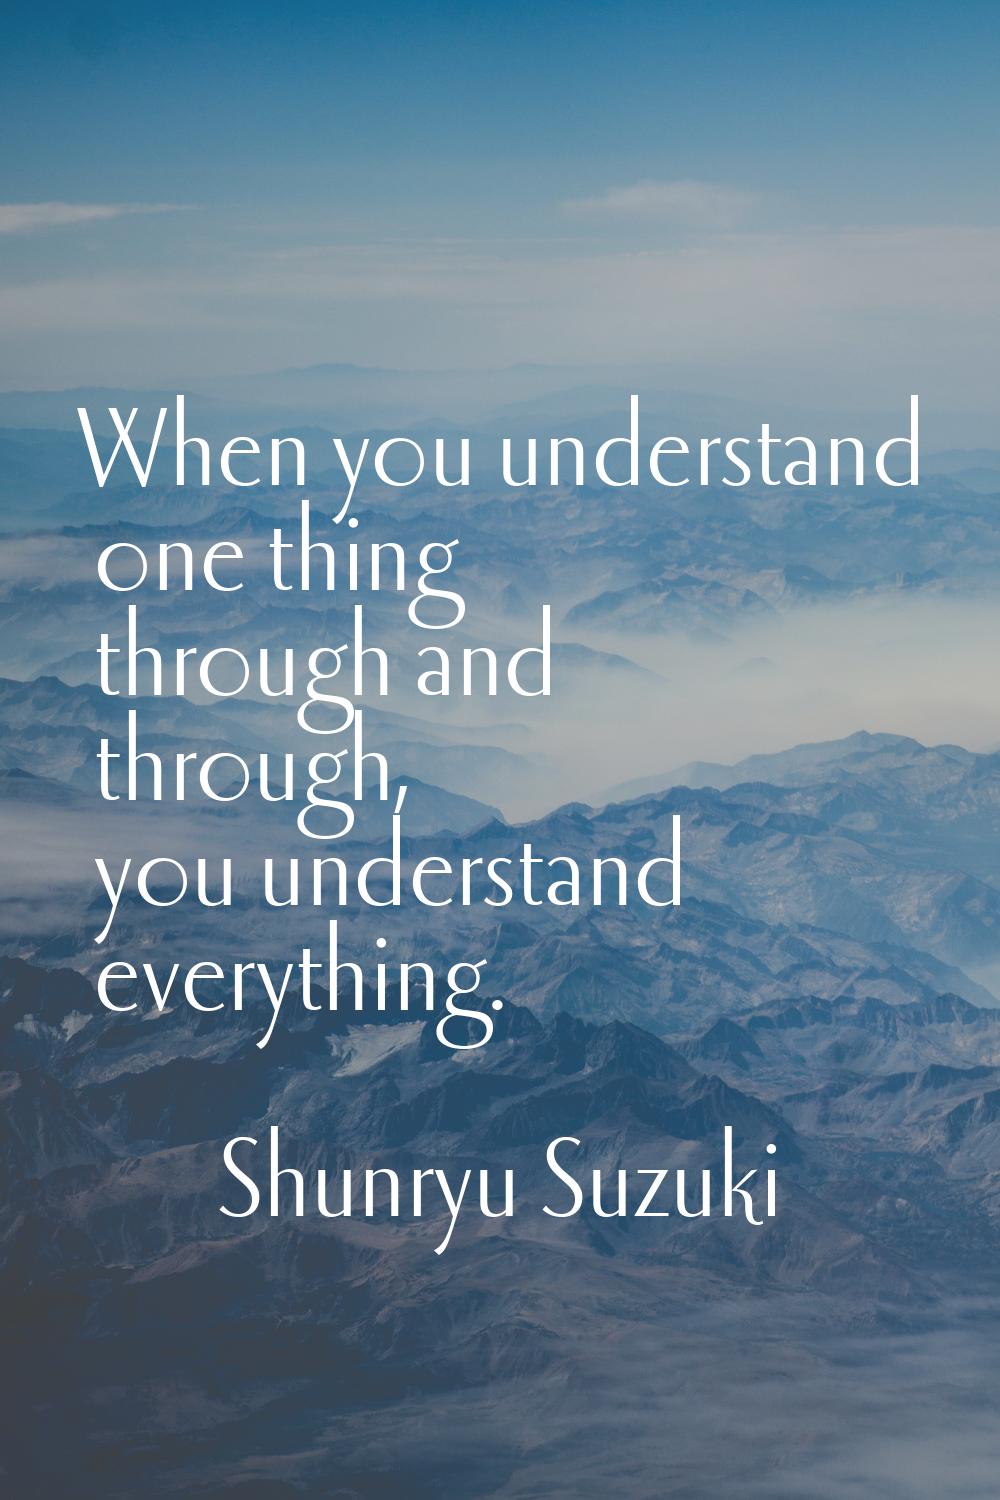 When you understand one thing through and through, you understand everything.